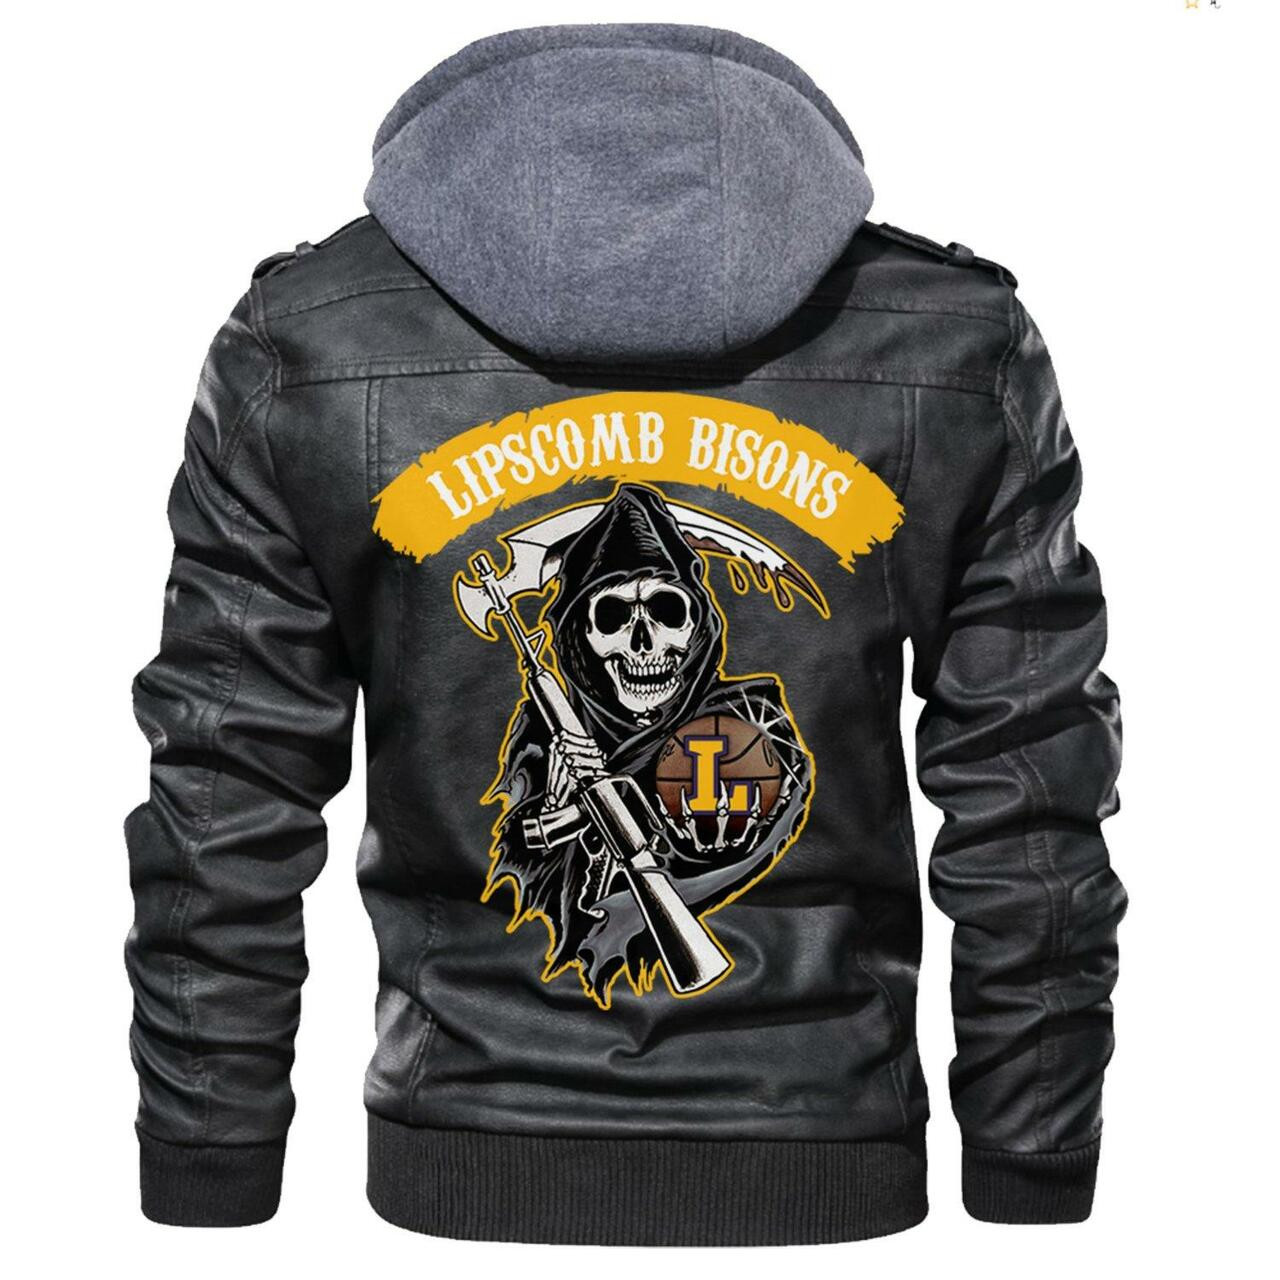 Our store has all of the latest leather jacket 36